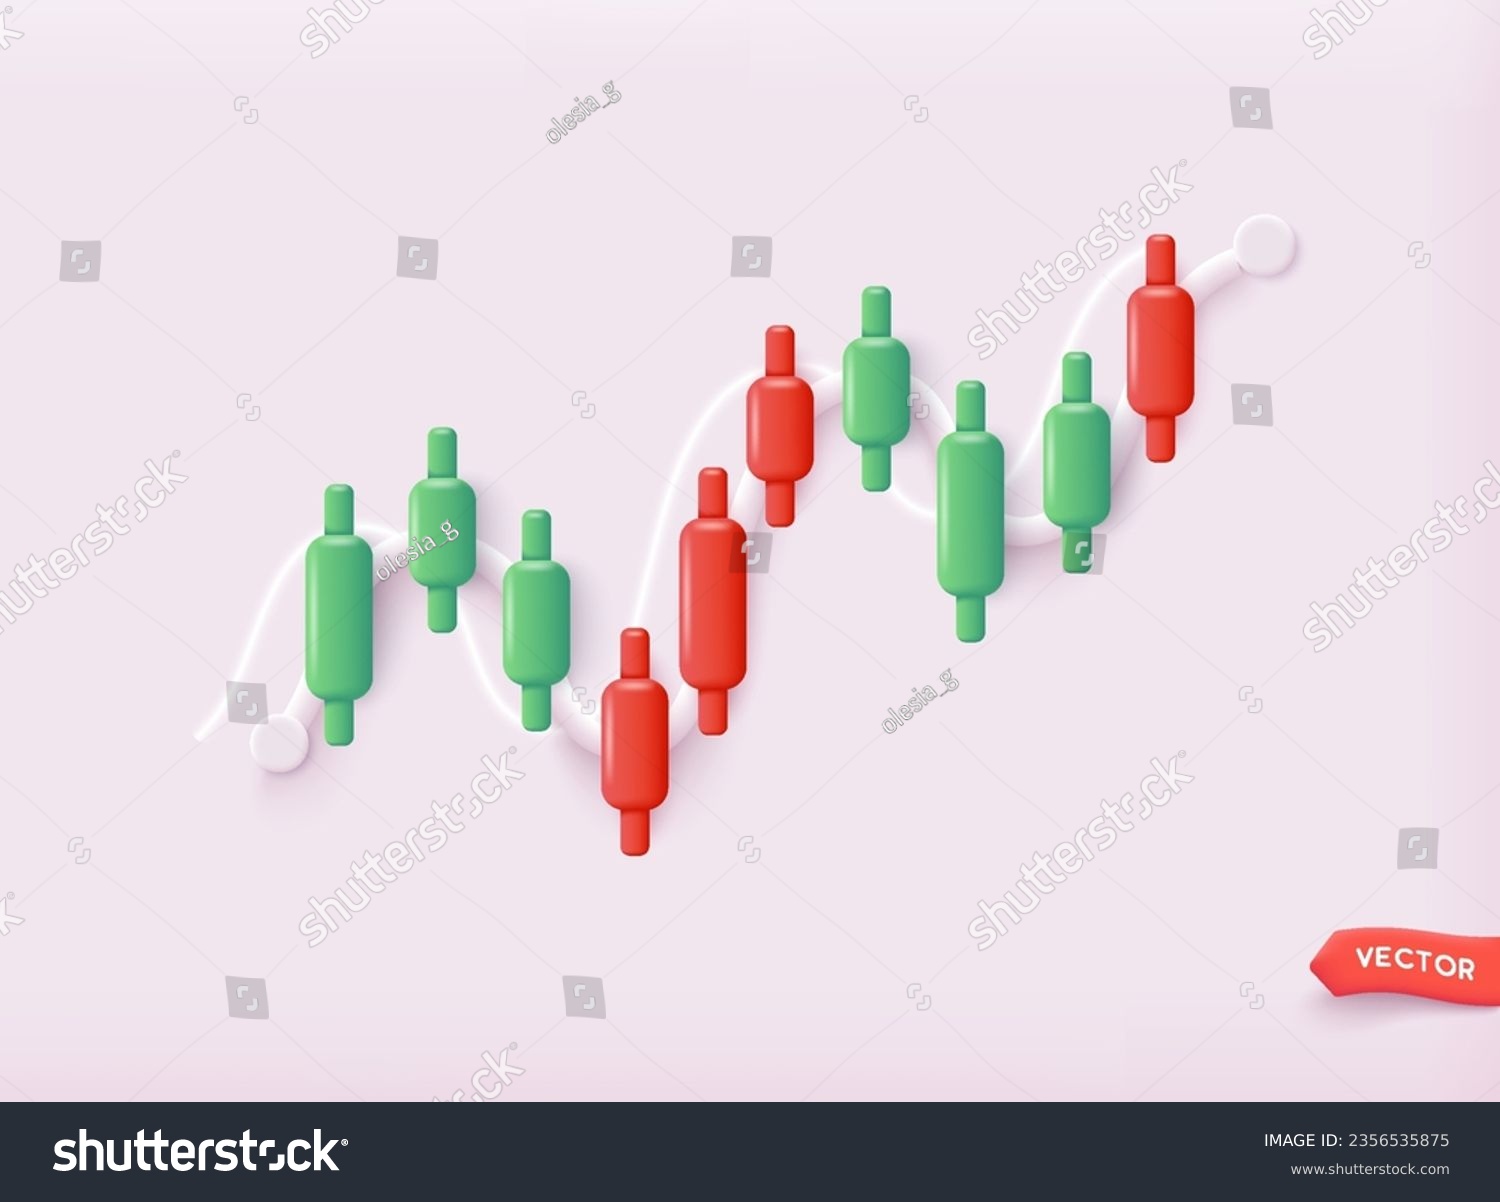 SVG of Stock market trading graph in graphic concept suitable for financial investment or Economic trends business idea. 3D Web Vector Illustrations. svg